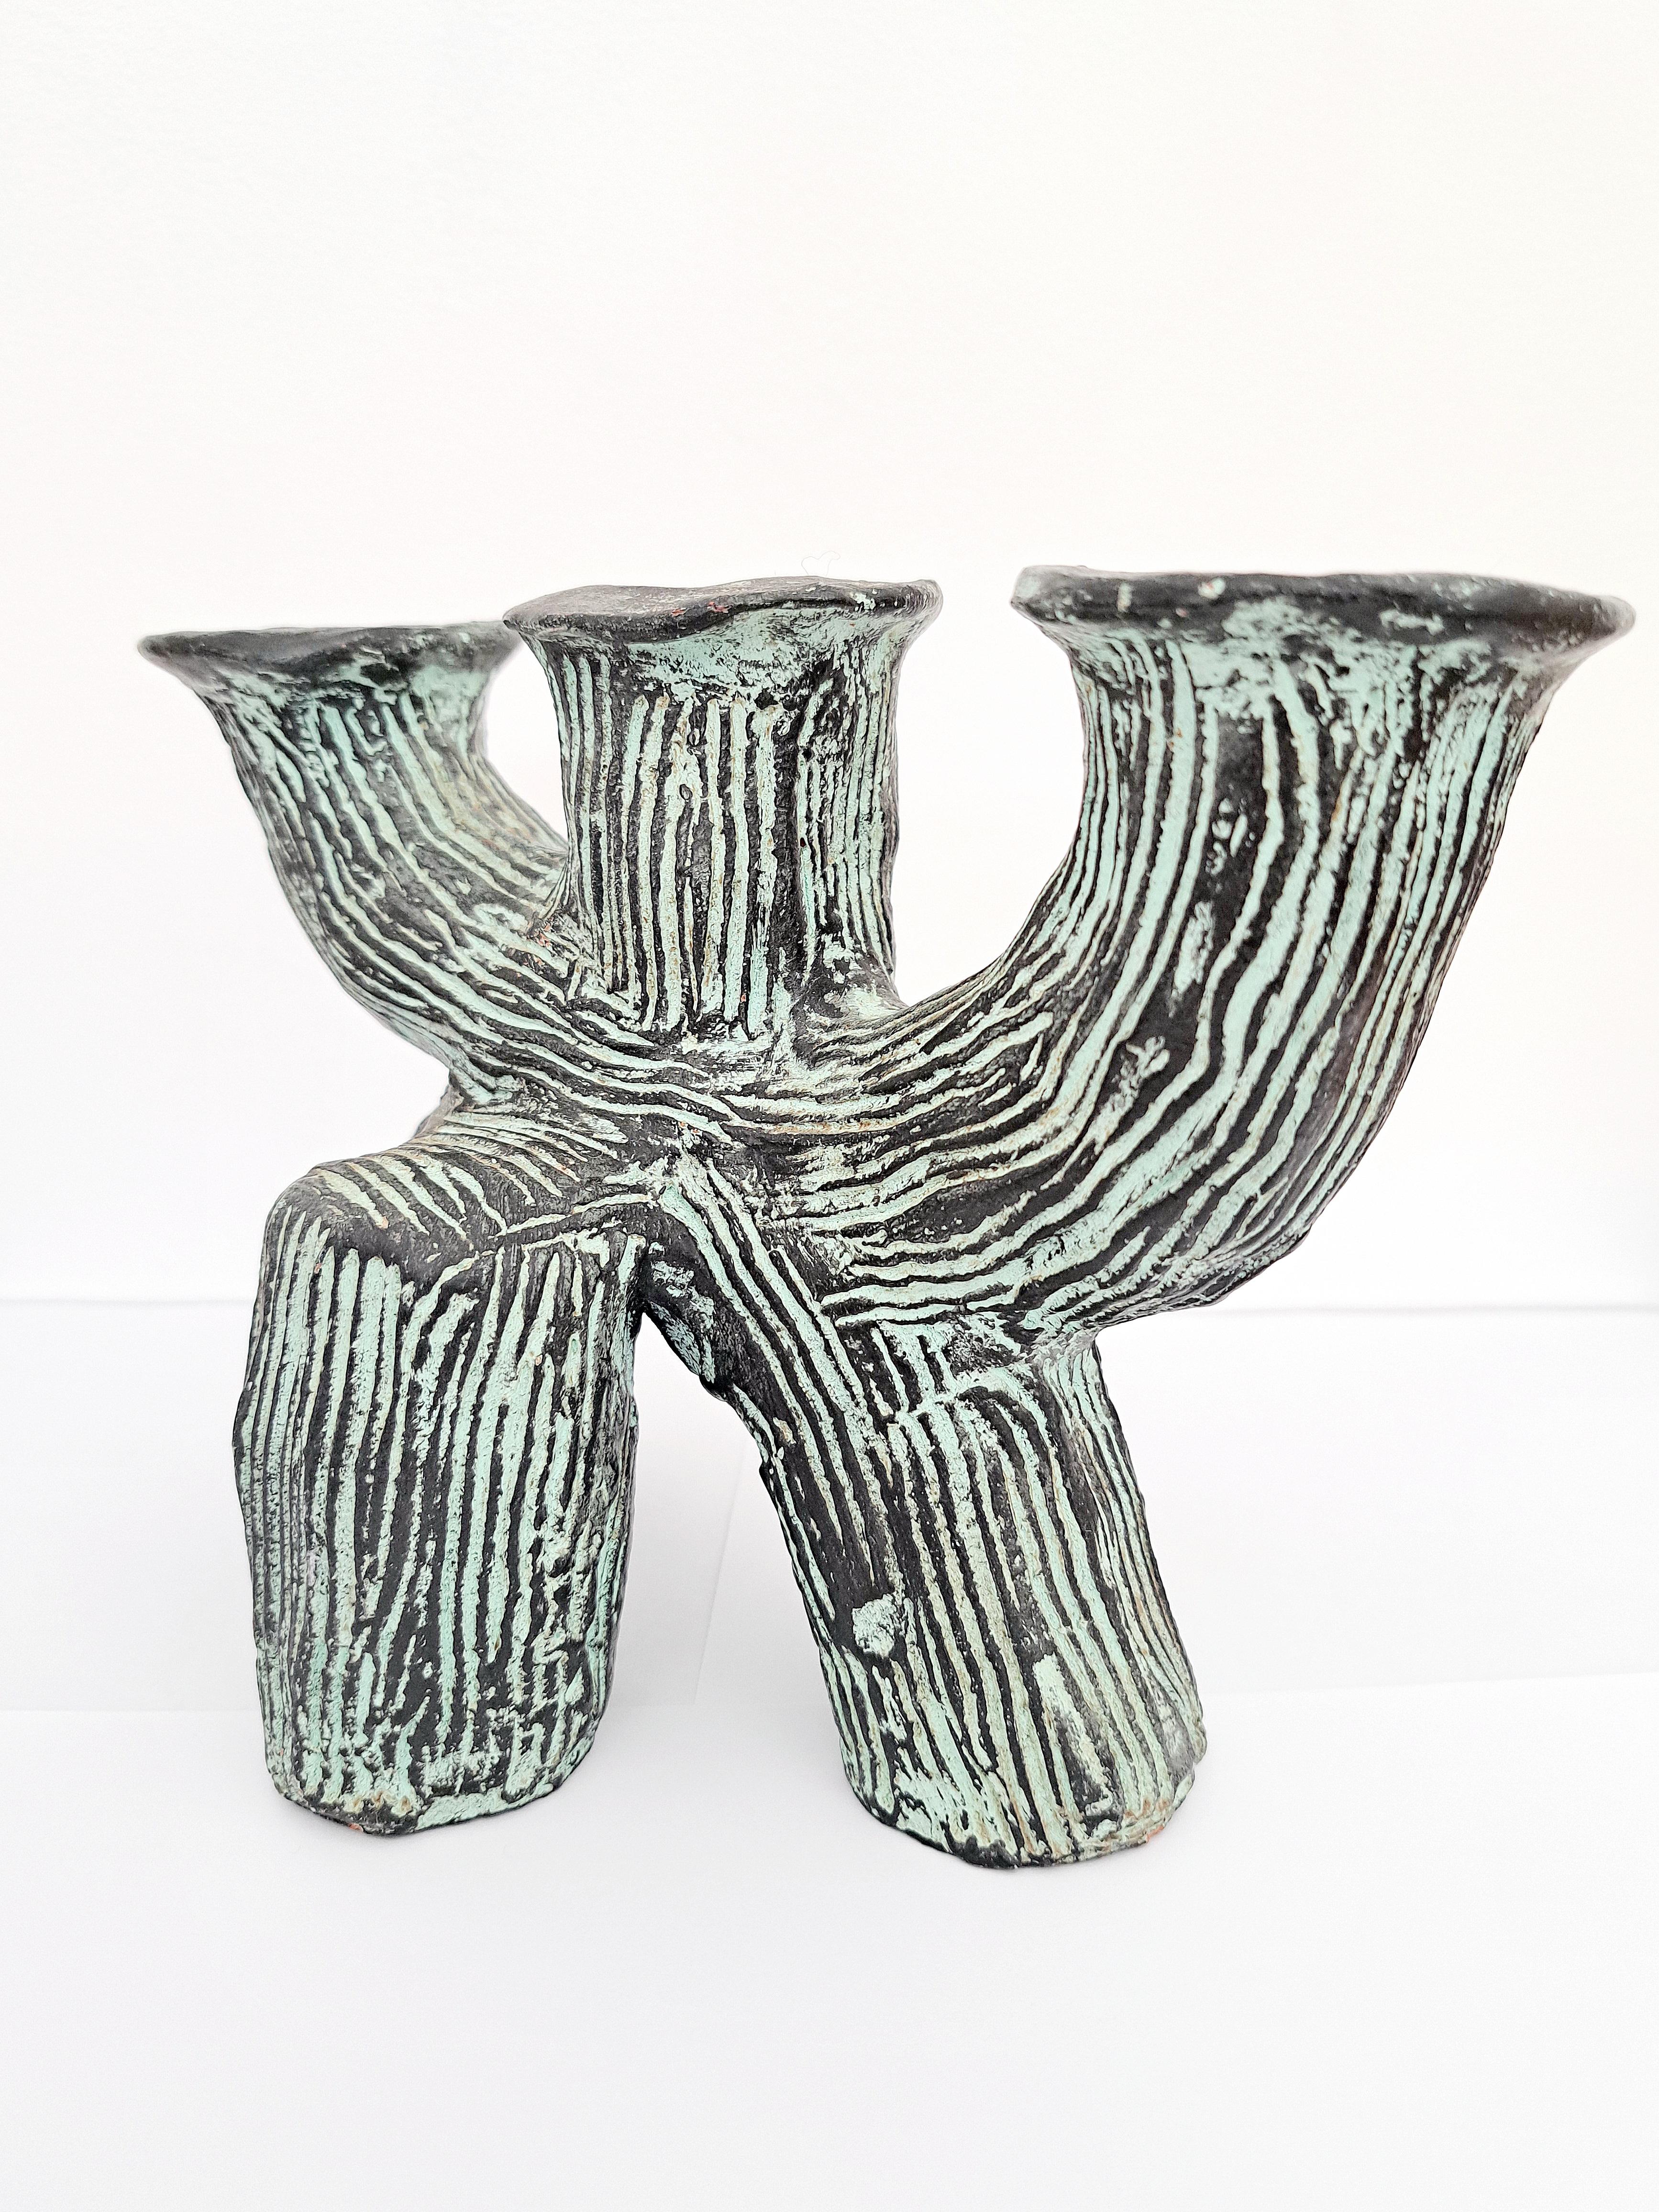 French Brutalist Ceramic Candelabra, France, late 20th century For Sale